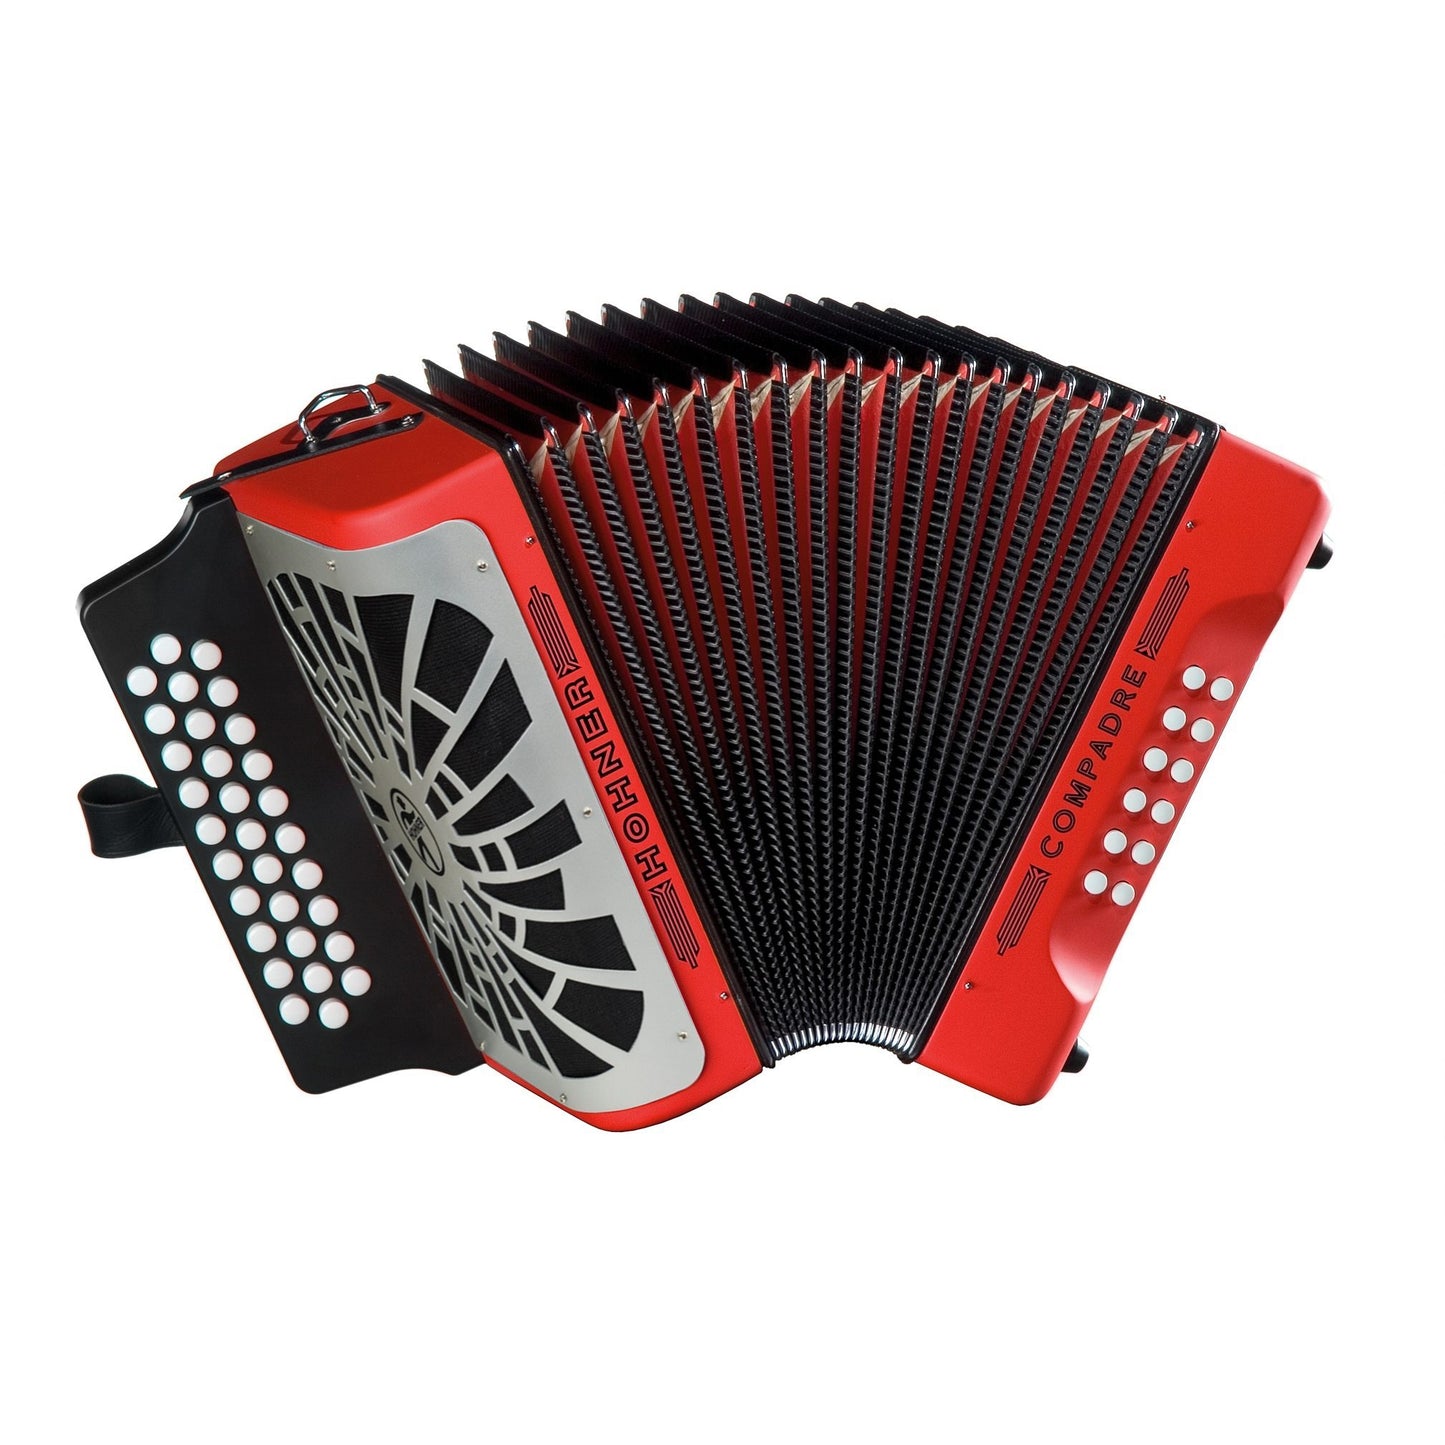 Hohner Compadre Accordion (with Gig Bag), Red, G/C/F, with Gig Bag